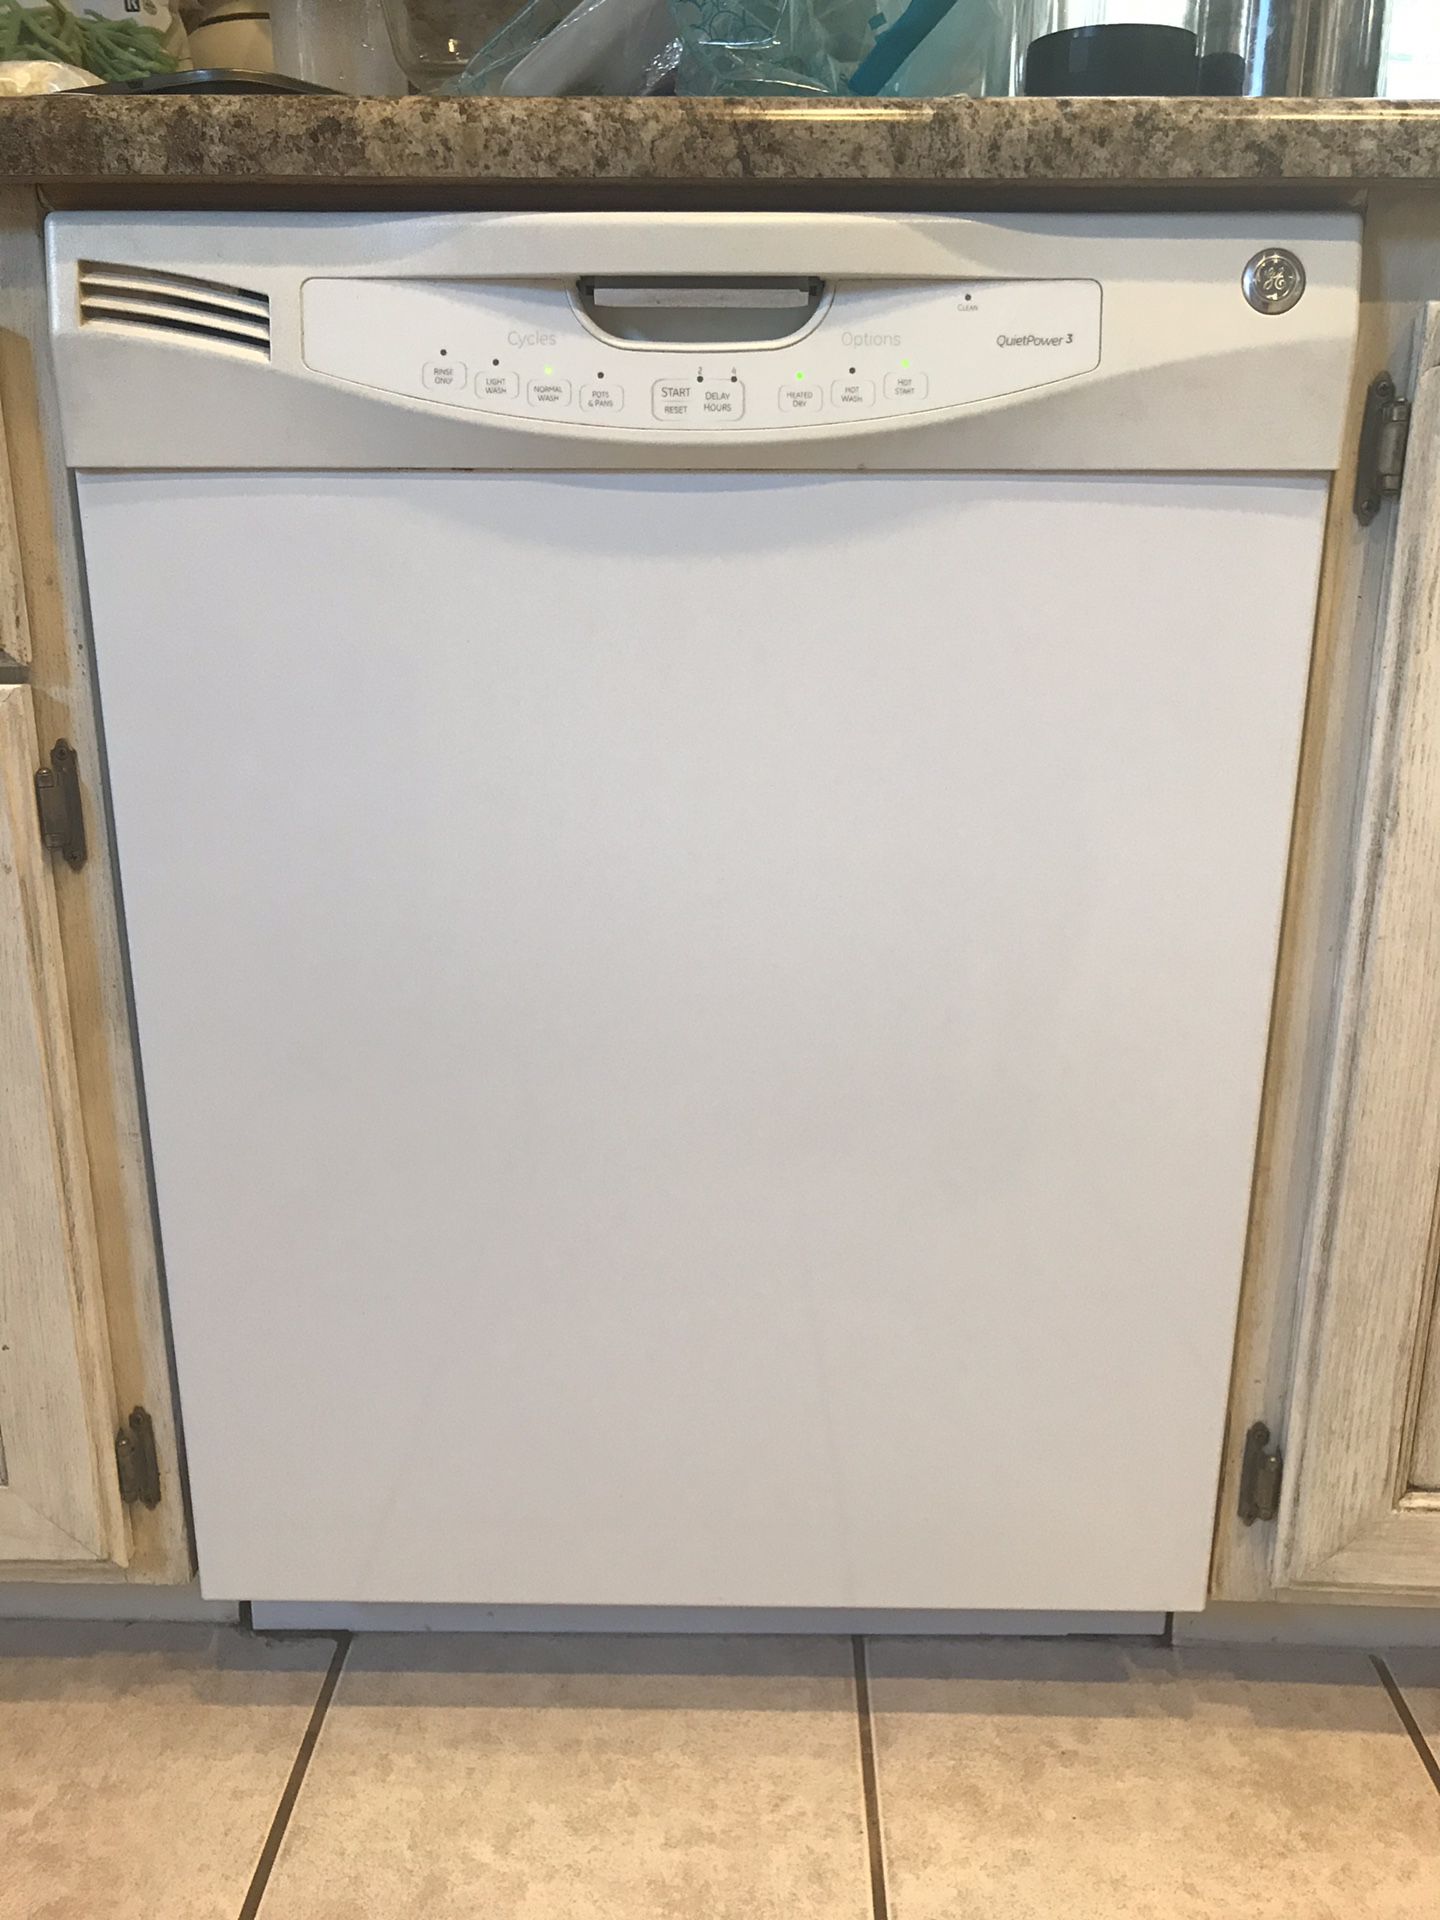 GE Quietpower 3 Dishwasher in white color 50 - 52 decibels clean working condition